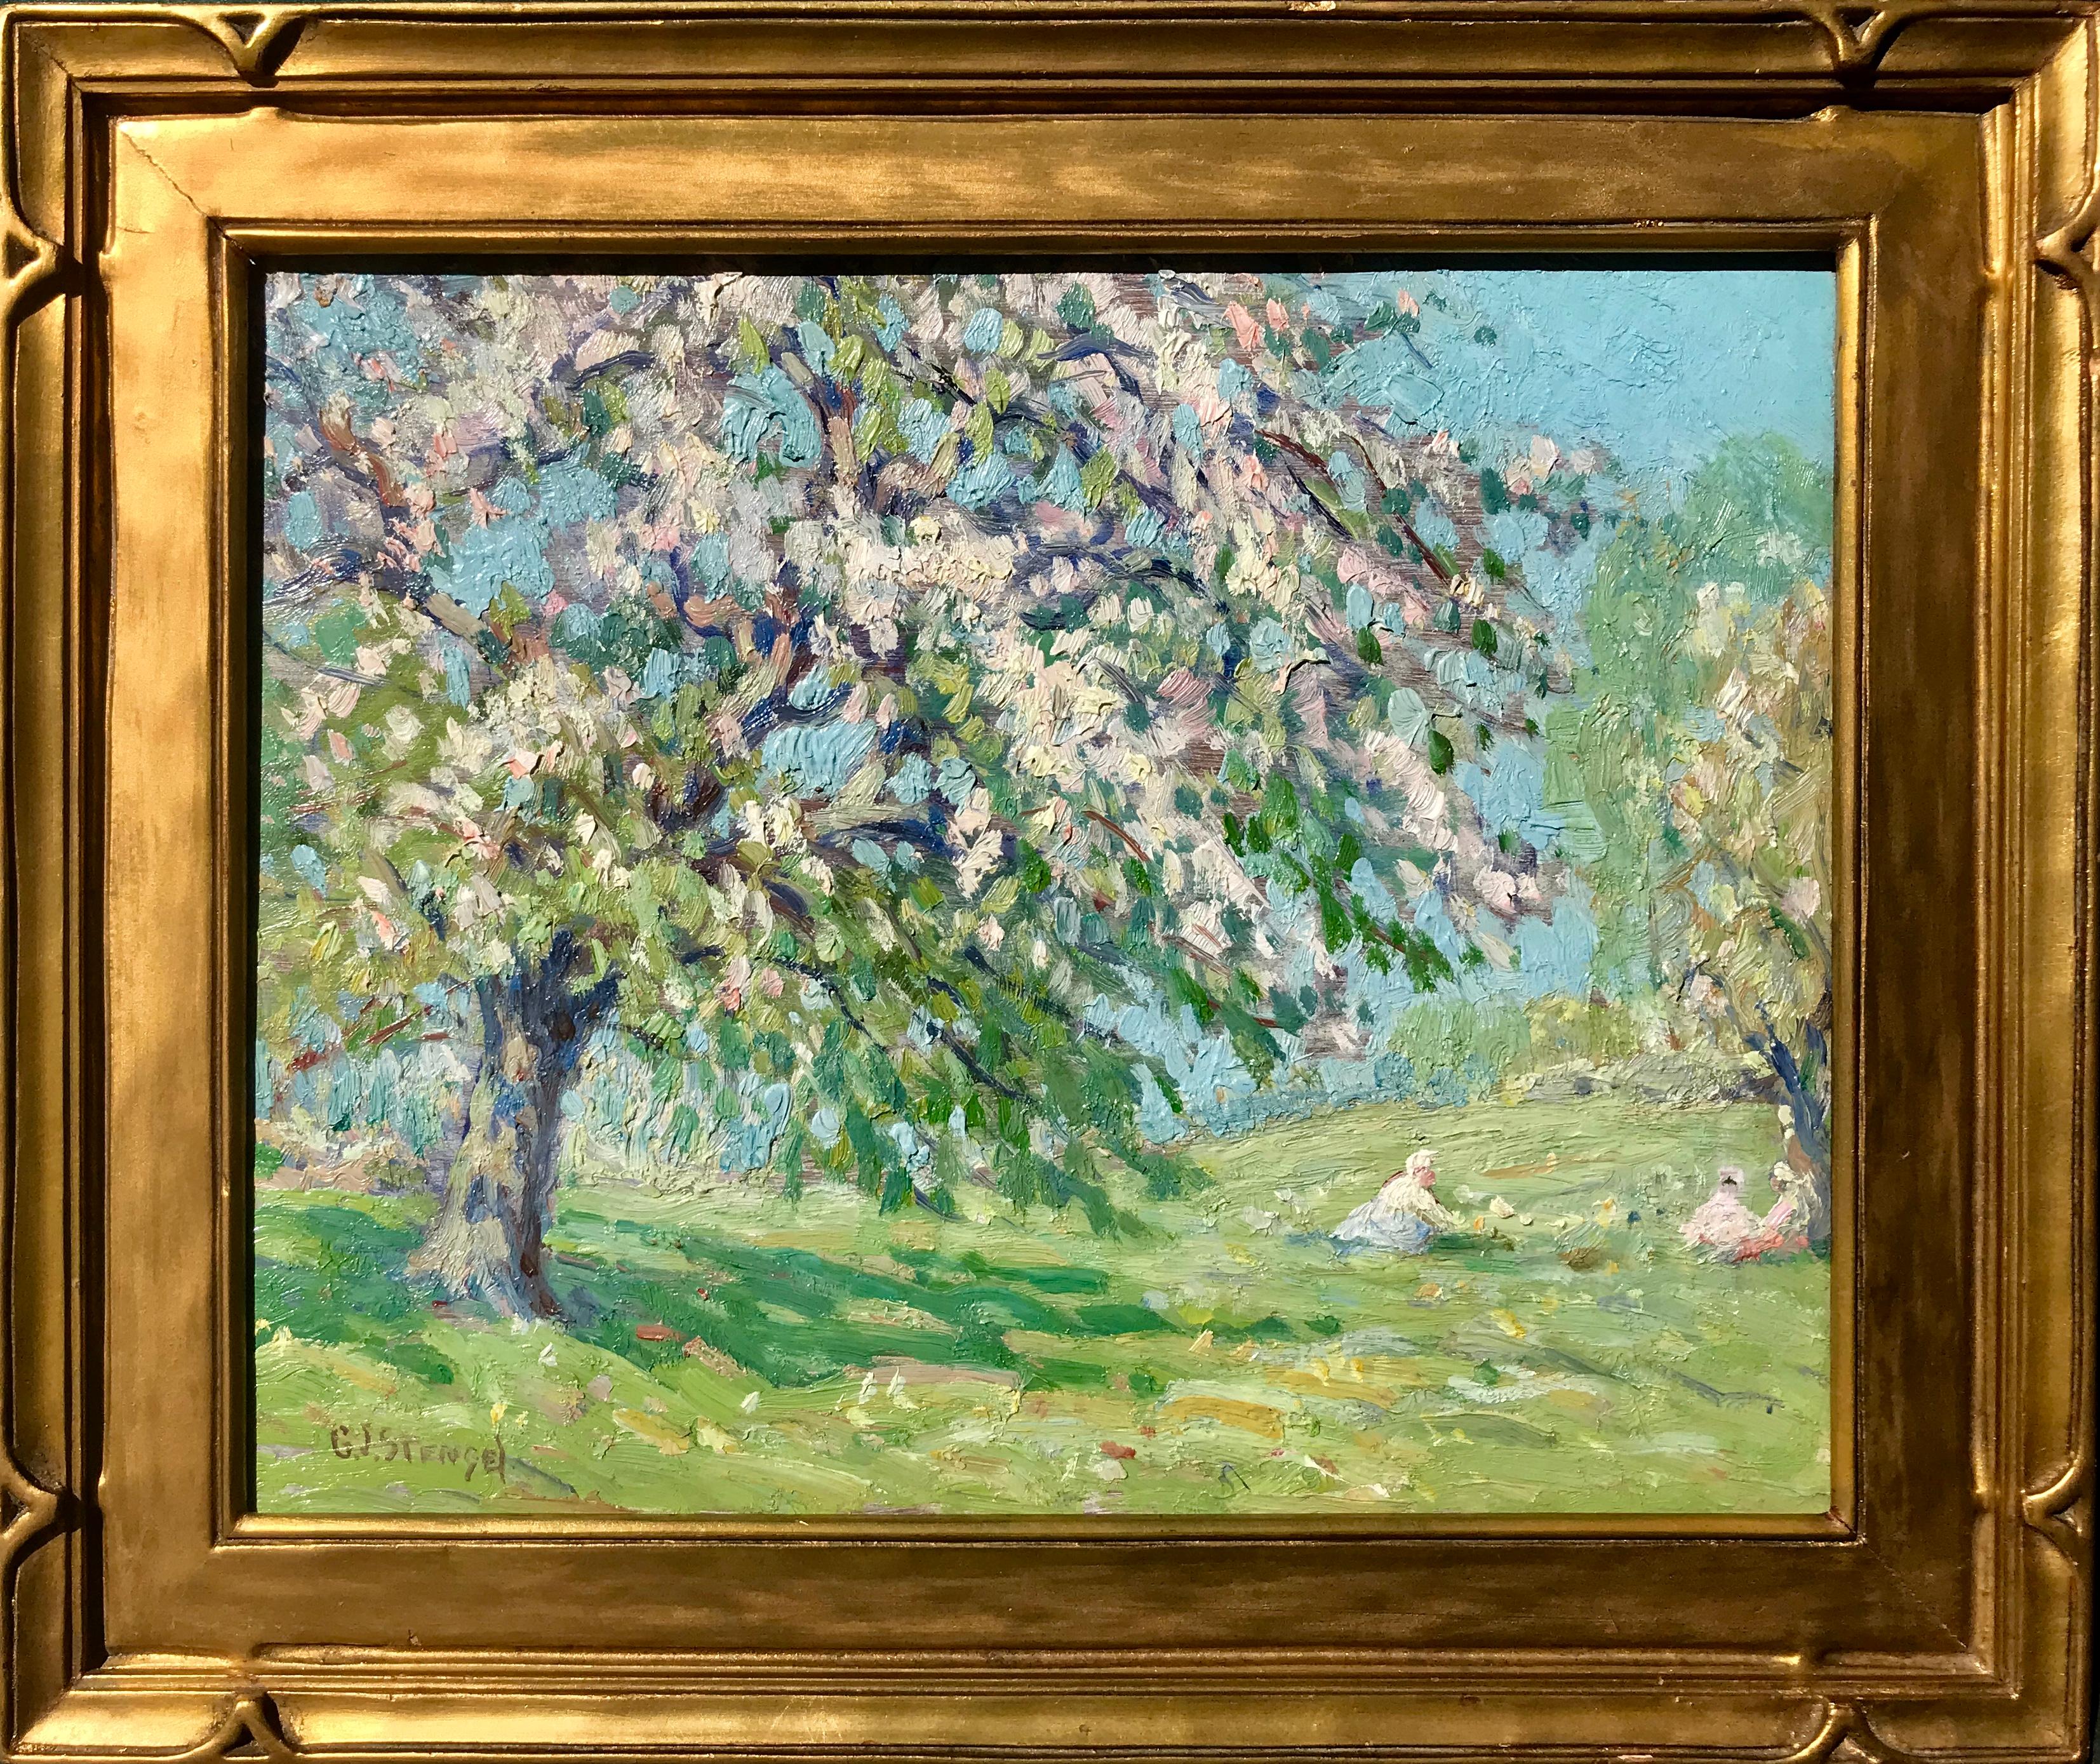 Blossom Time” - Gray Figurative Painting by George J. Stengel